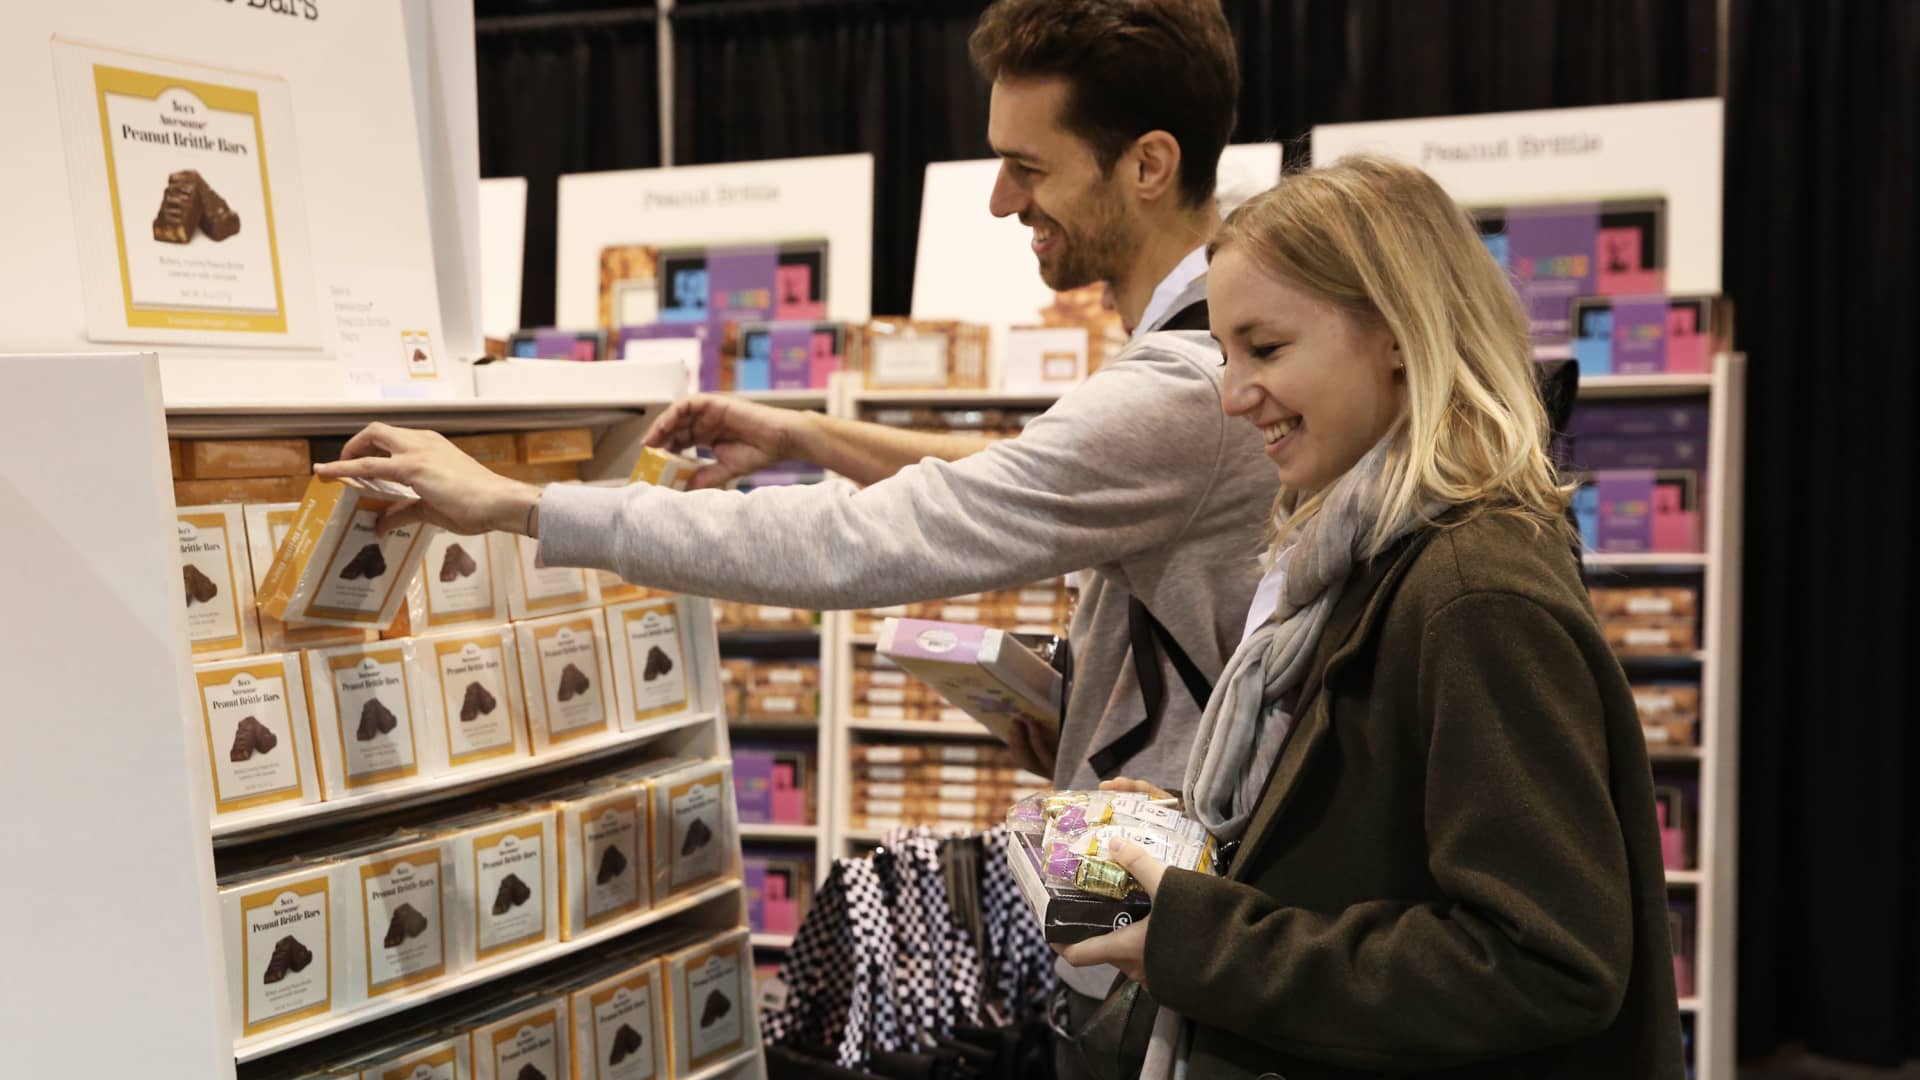 People shopping for See's Candies at the Berkshire Hathaway Annual Shareholders Meeting in Omaha, Nebraska.